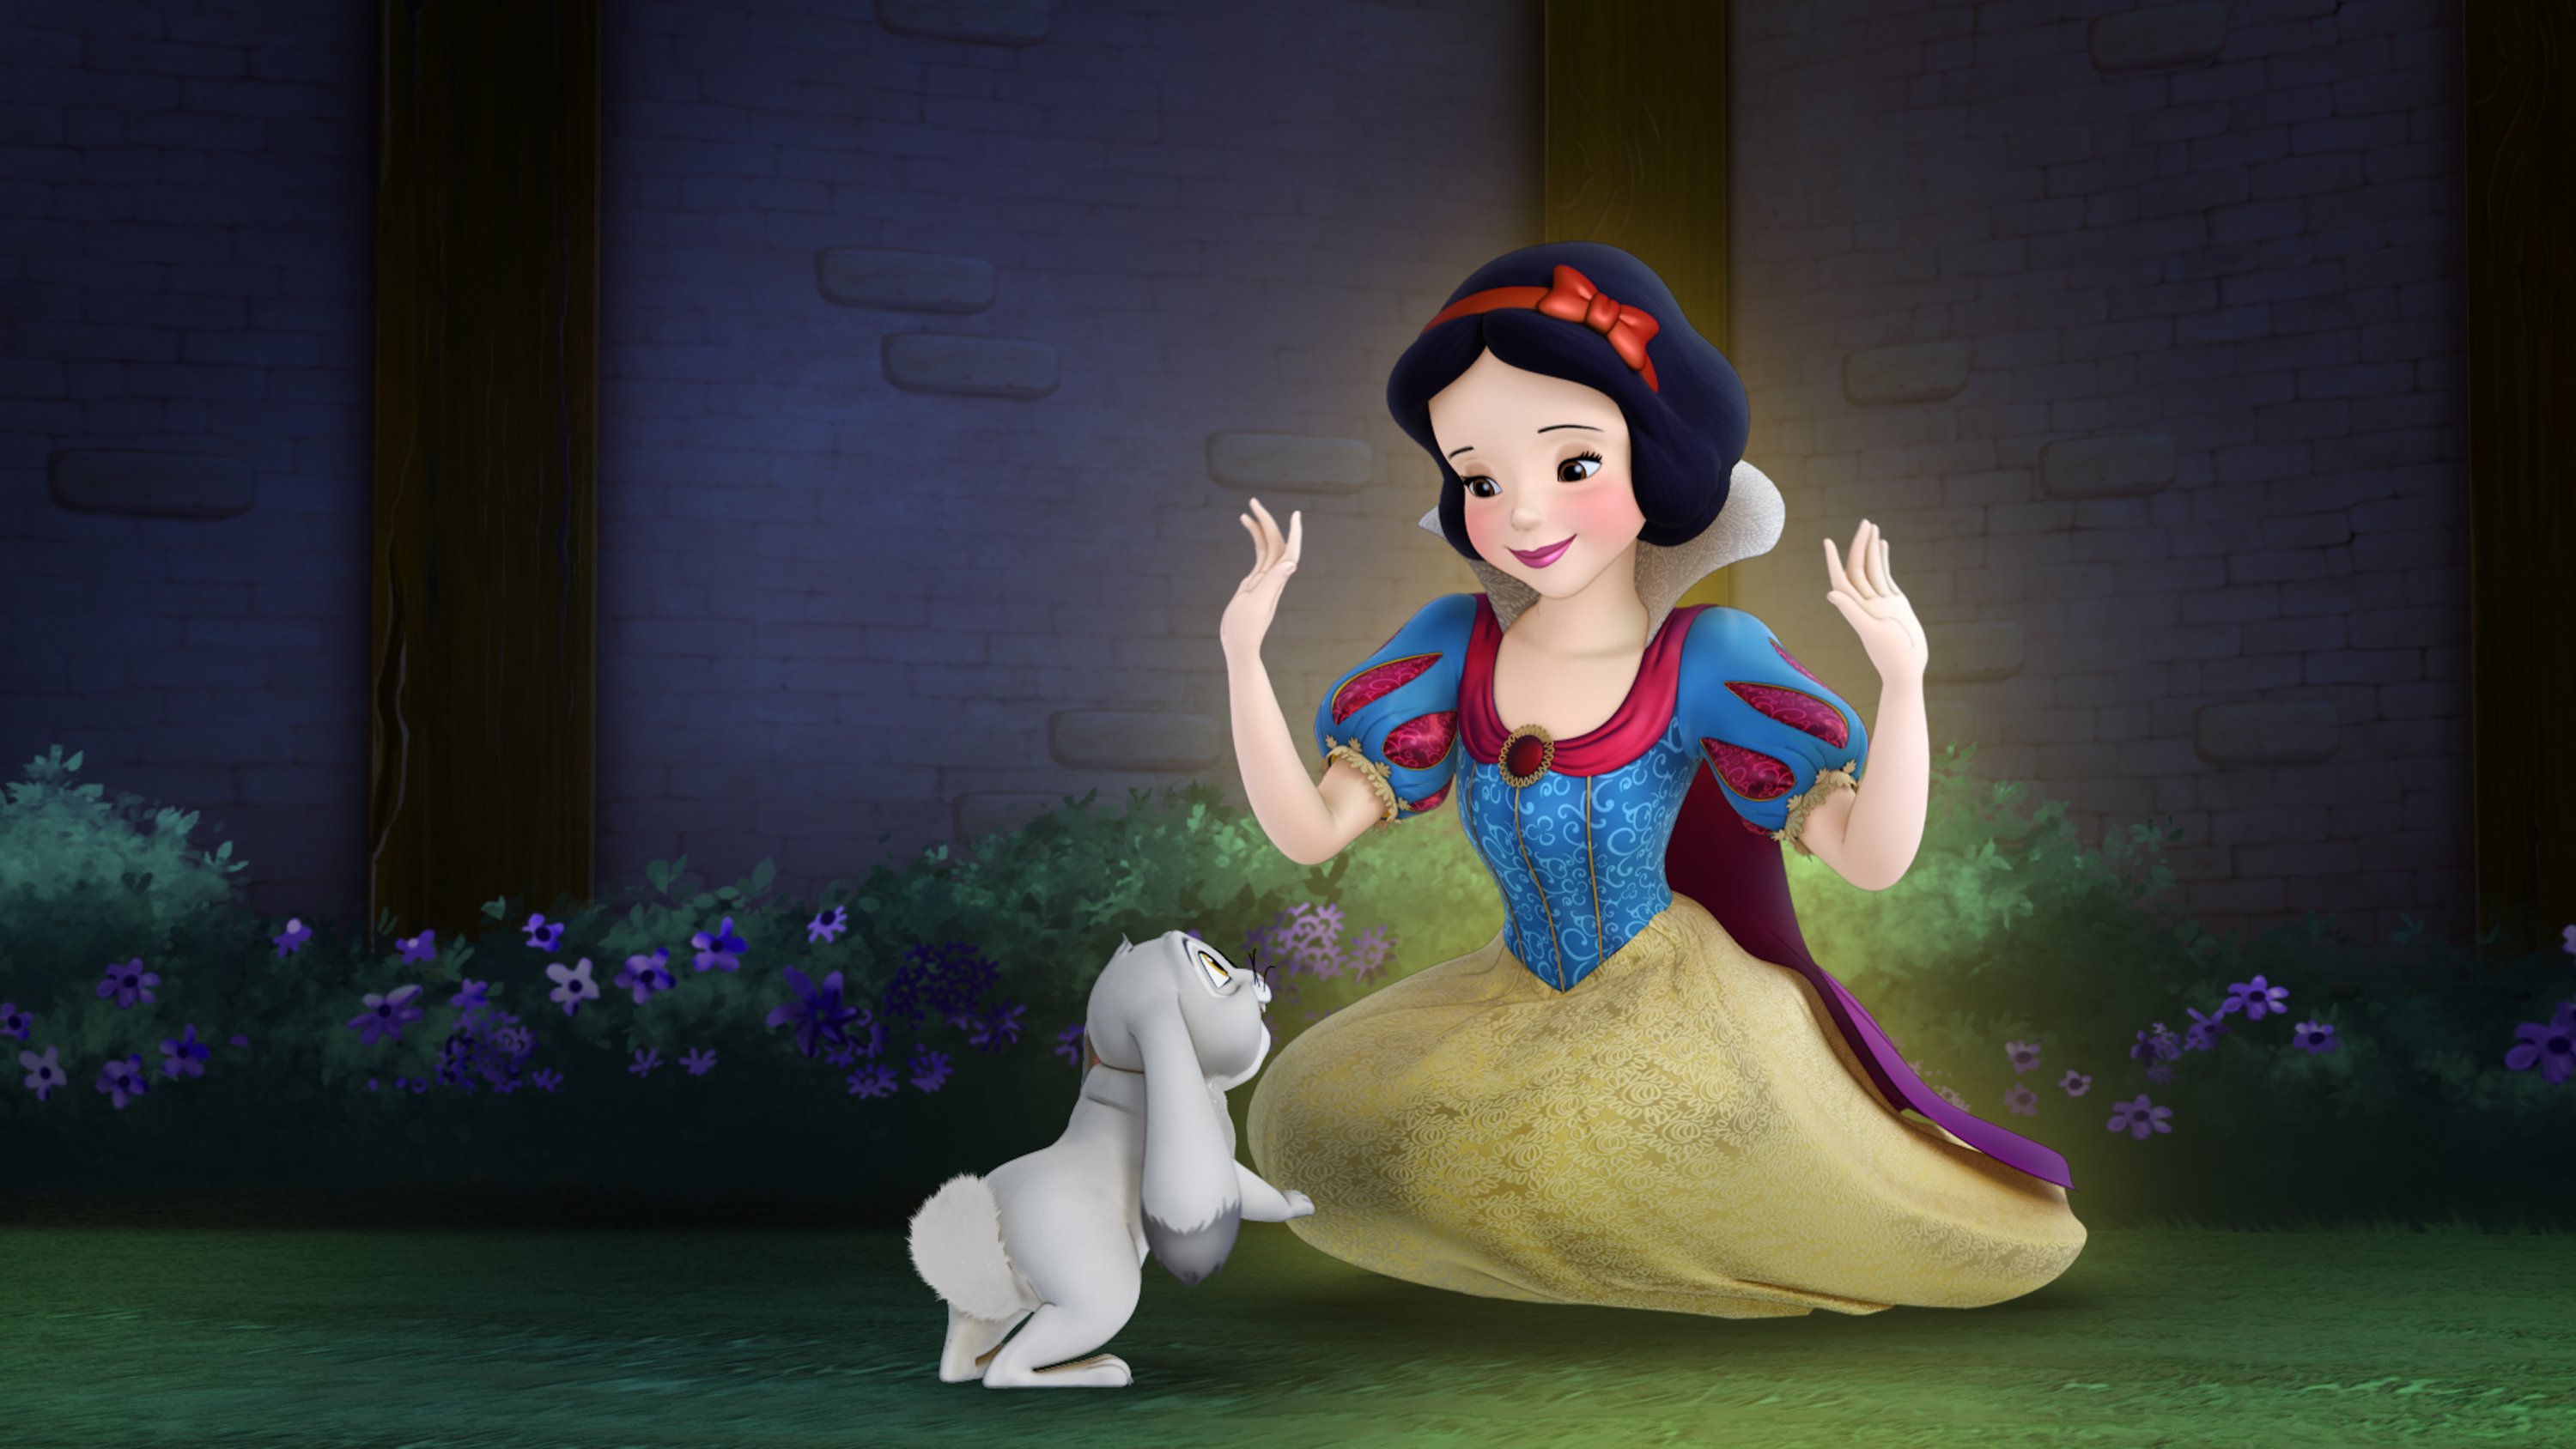 Snow White on Disney Channel's 'Sofia the First' 